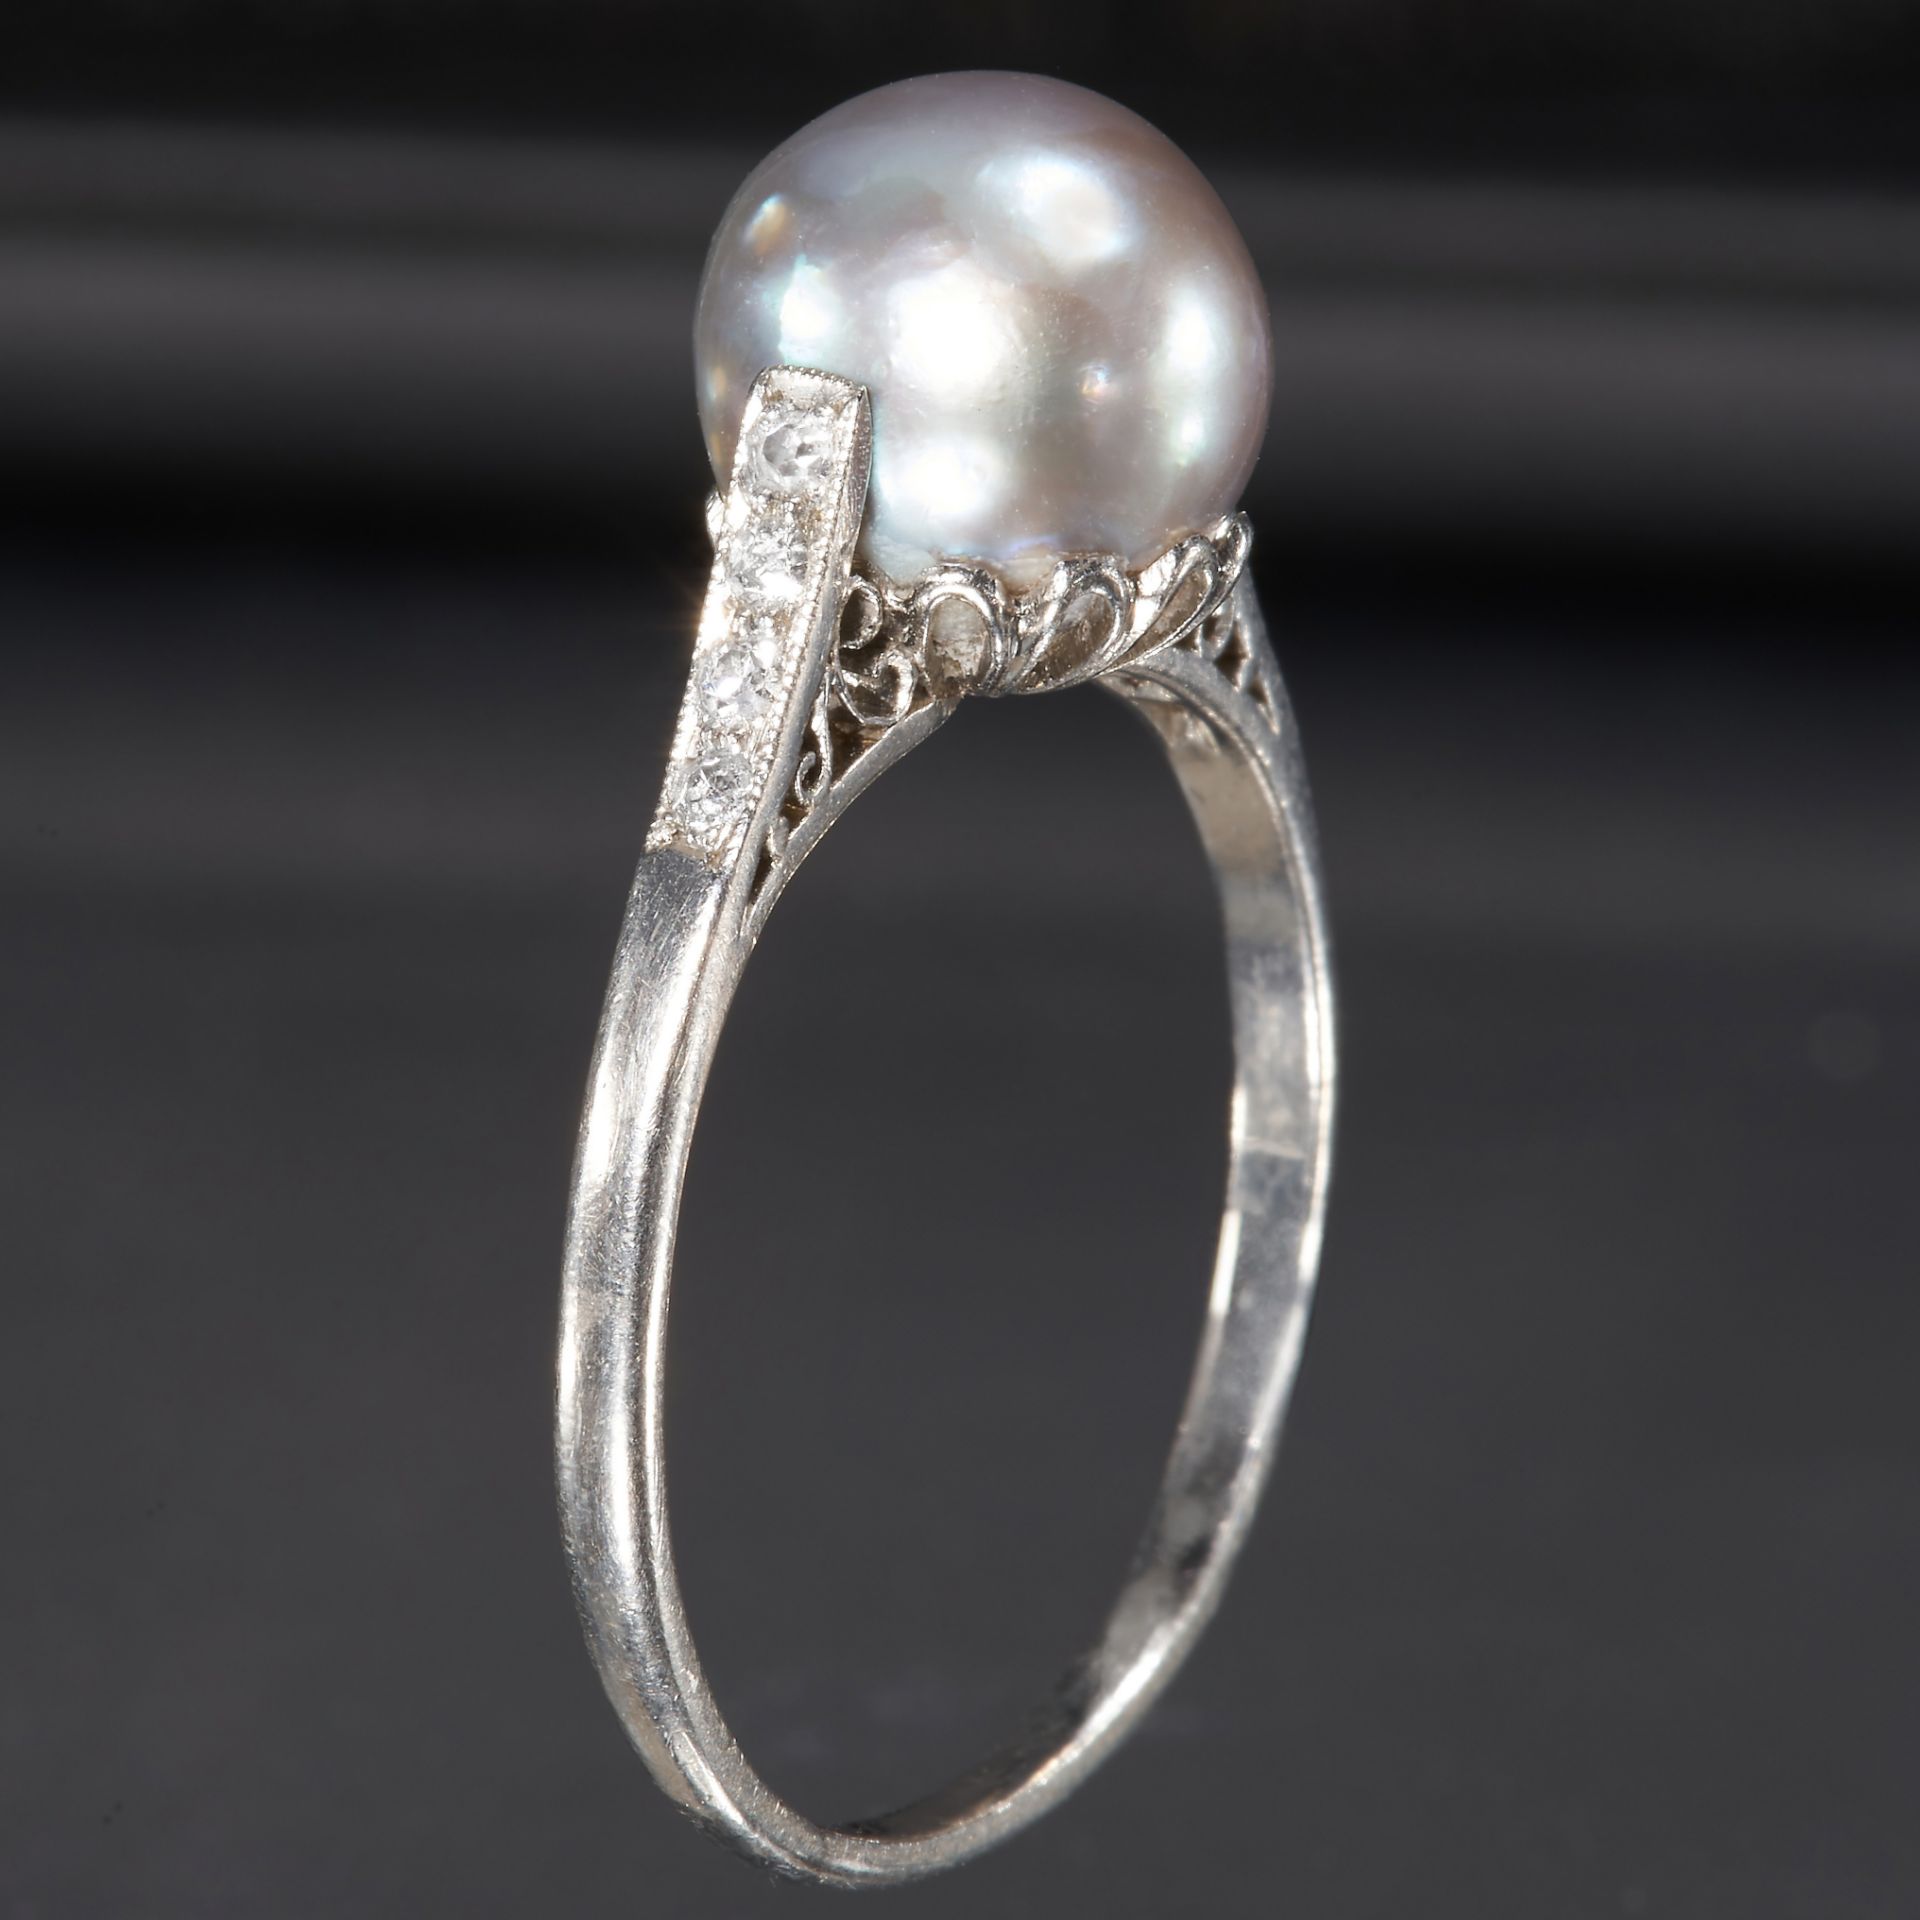 NATURAL SALTWATER PEARL AND DIAMOND RING - Image 2 of 3